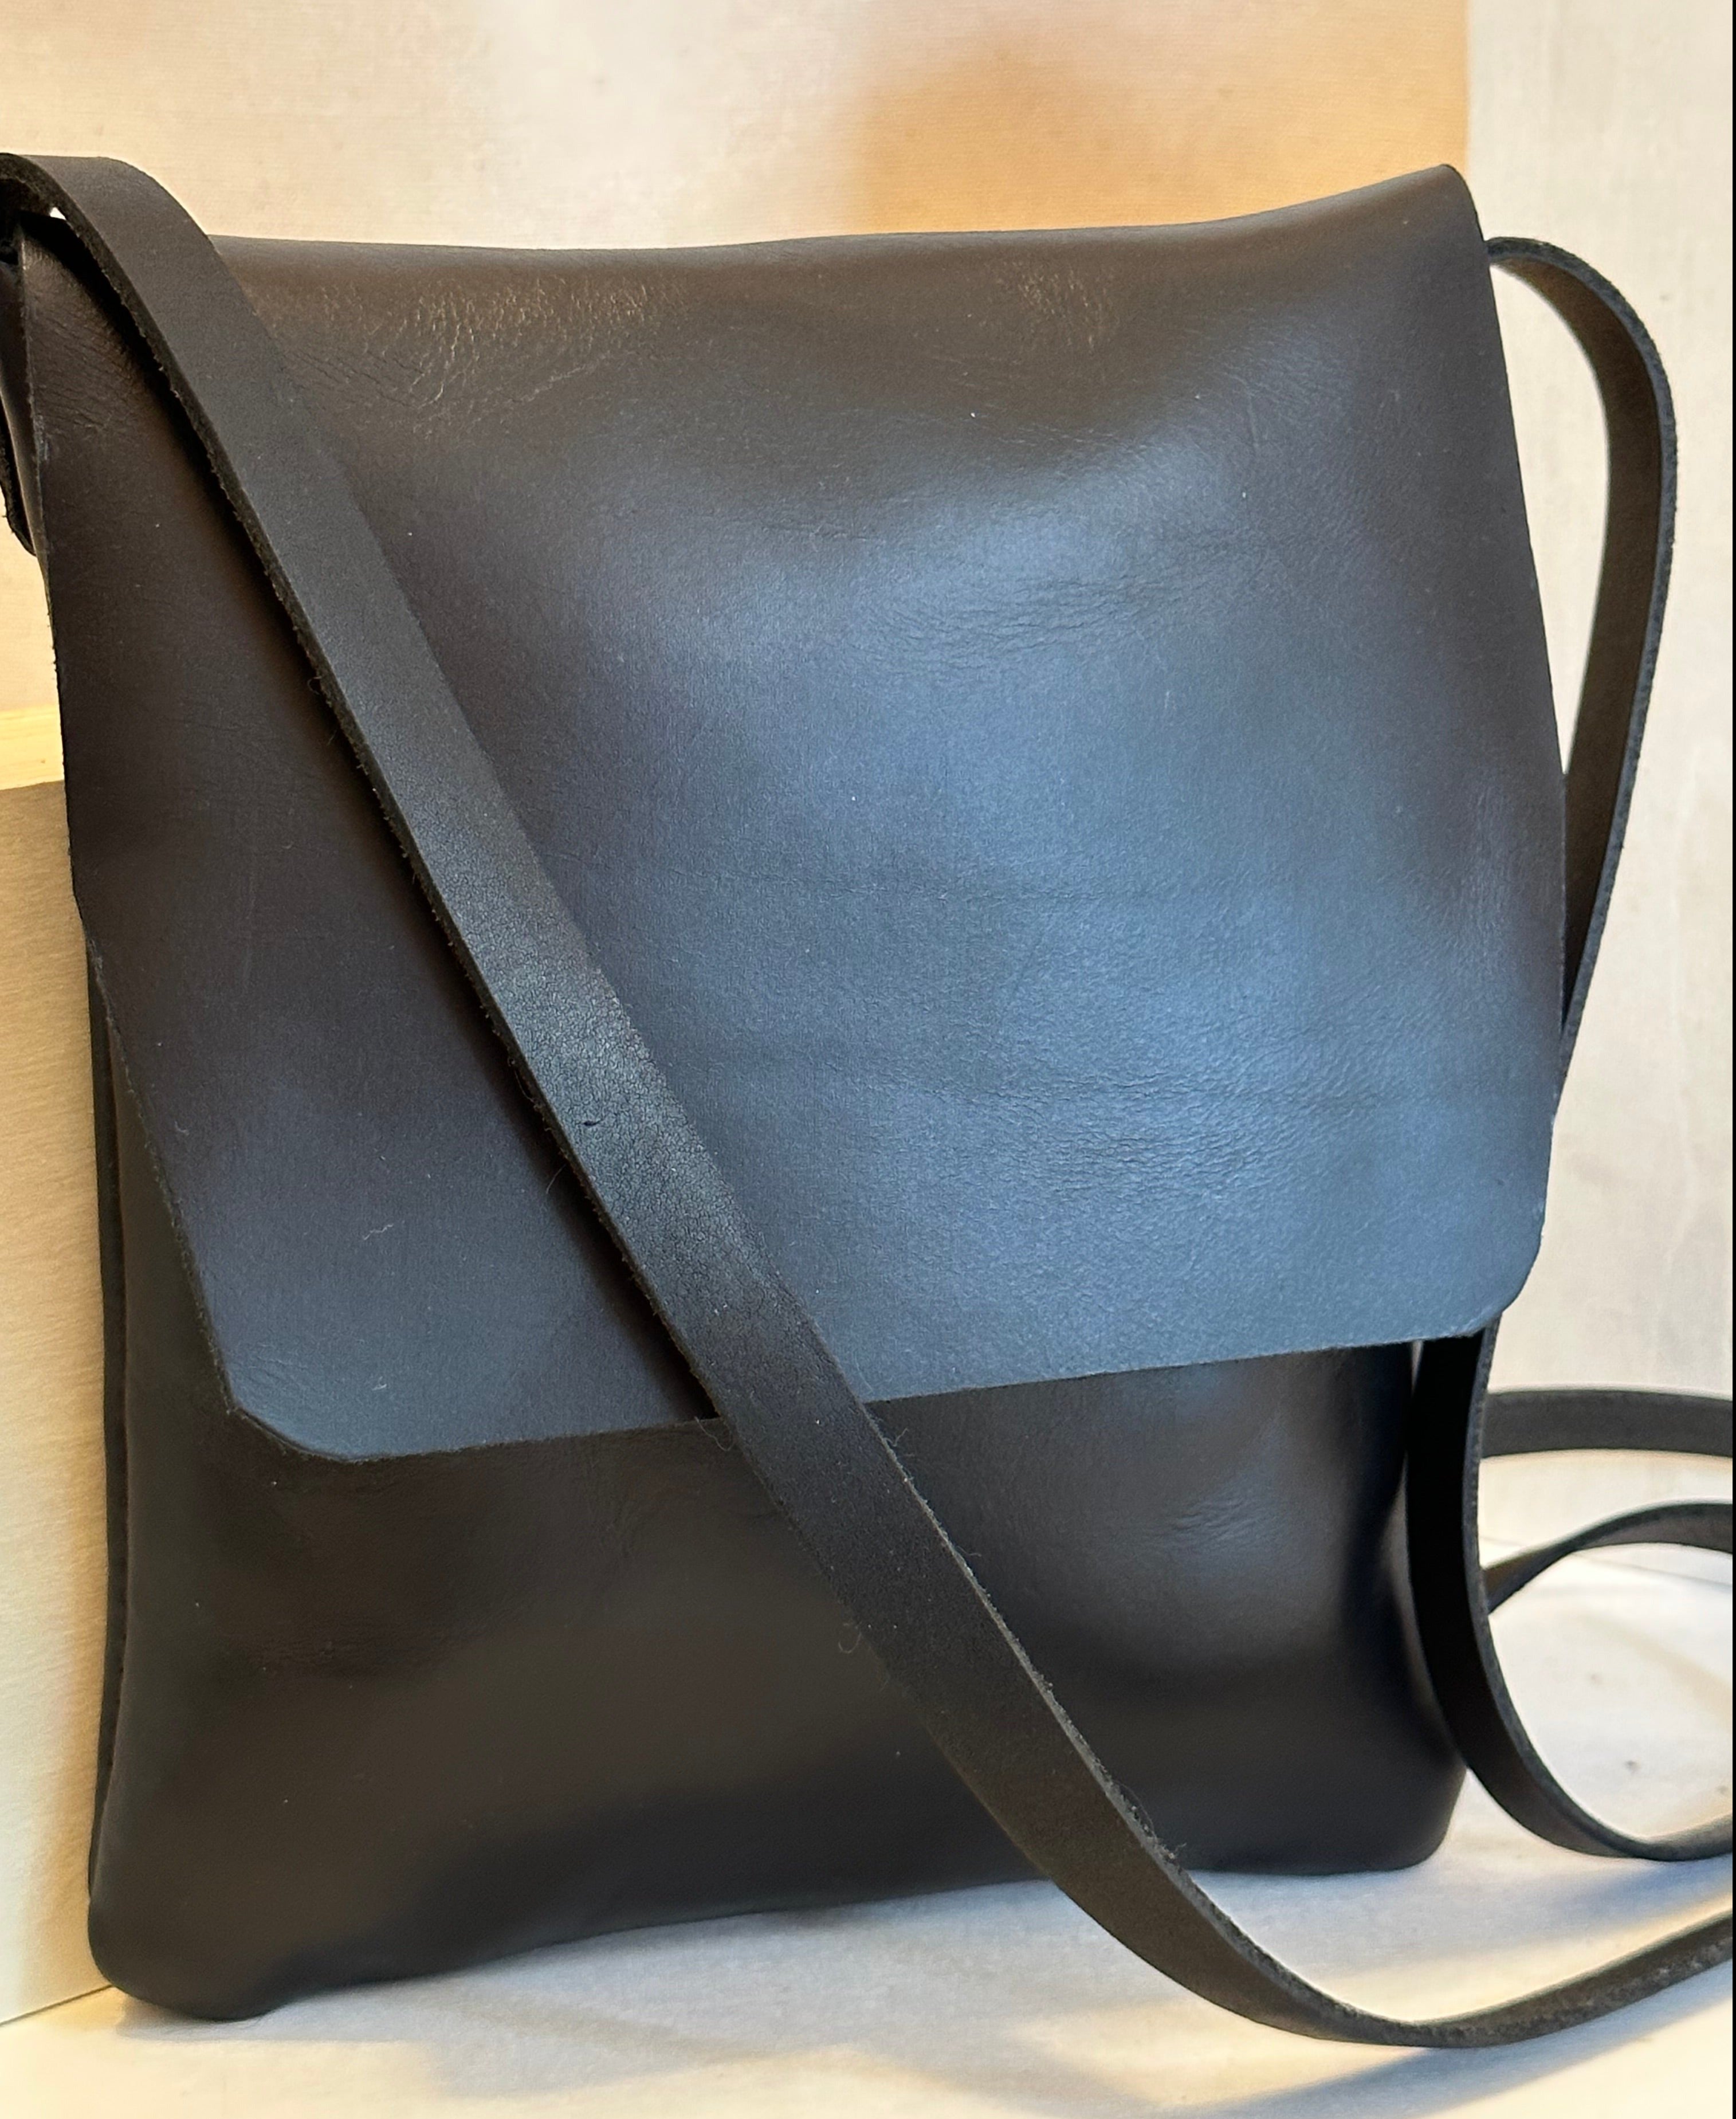 Shining Rock Goods Essential Black cross body handbag- small and compact with plenty of room to carry your essentials perfect little treat for yourself or as a gift.